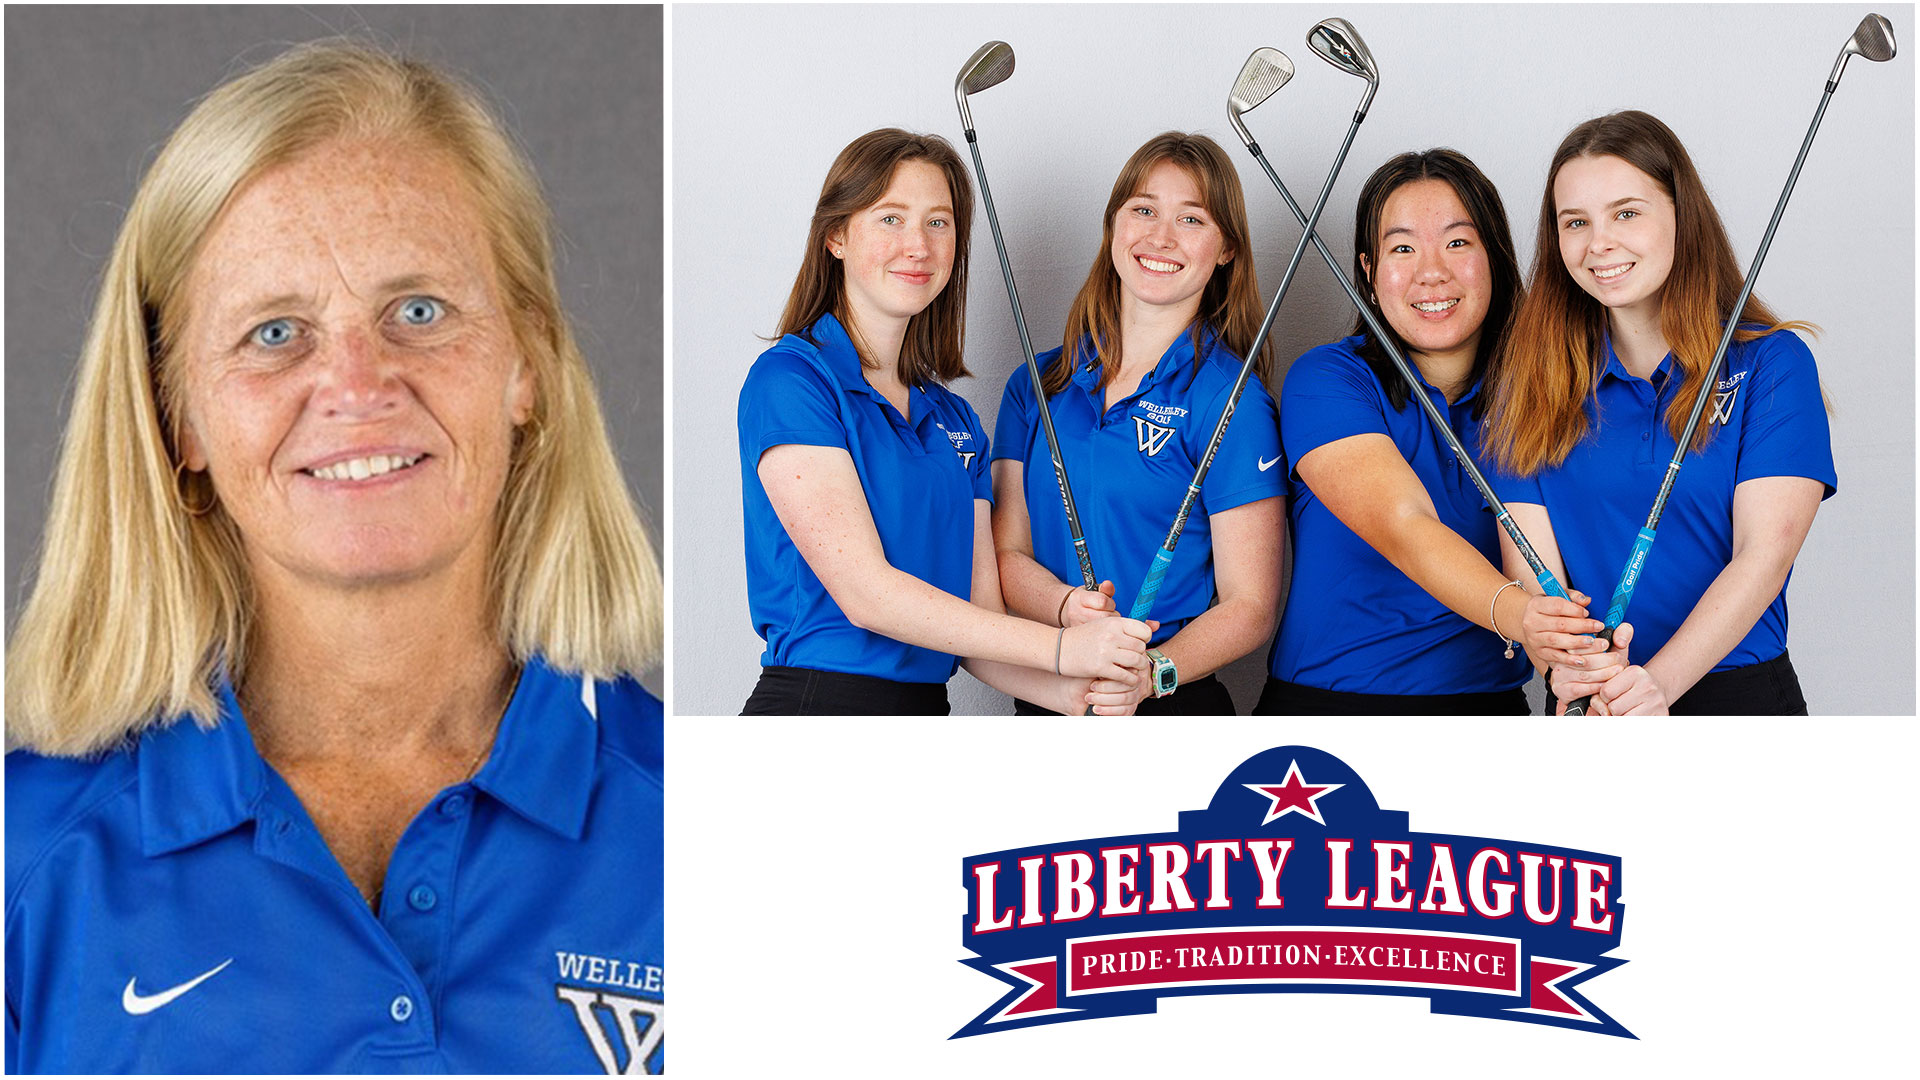 Wellesley golf earned Liberty League Coaching Staff of the Year honors (Frank Poulin)